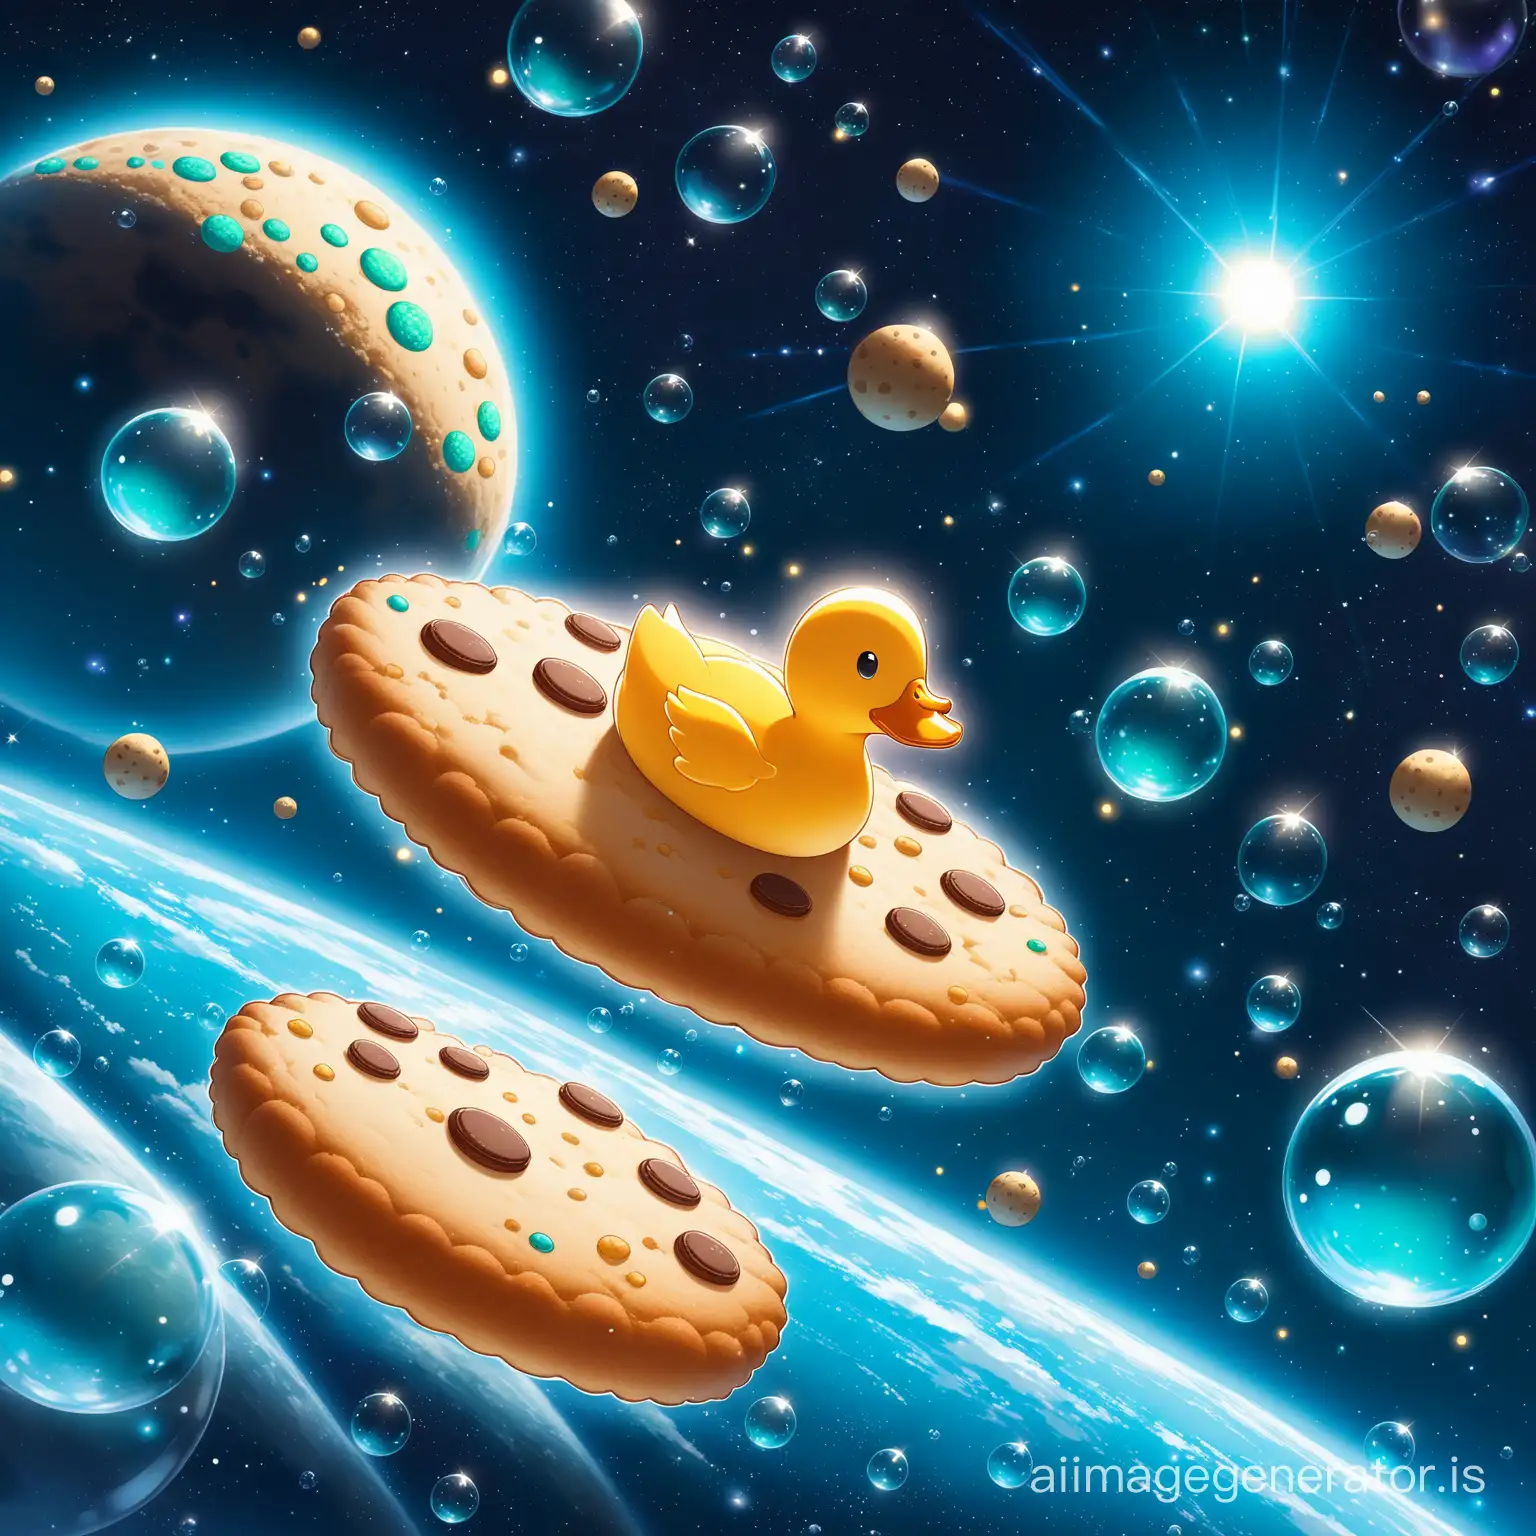 Adorable-Duck-Flying-Among-Green-Rockets-in-Space-with-Floating-Bubbles-and-Cookies